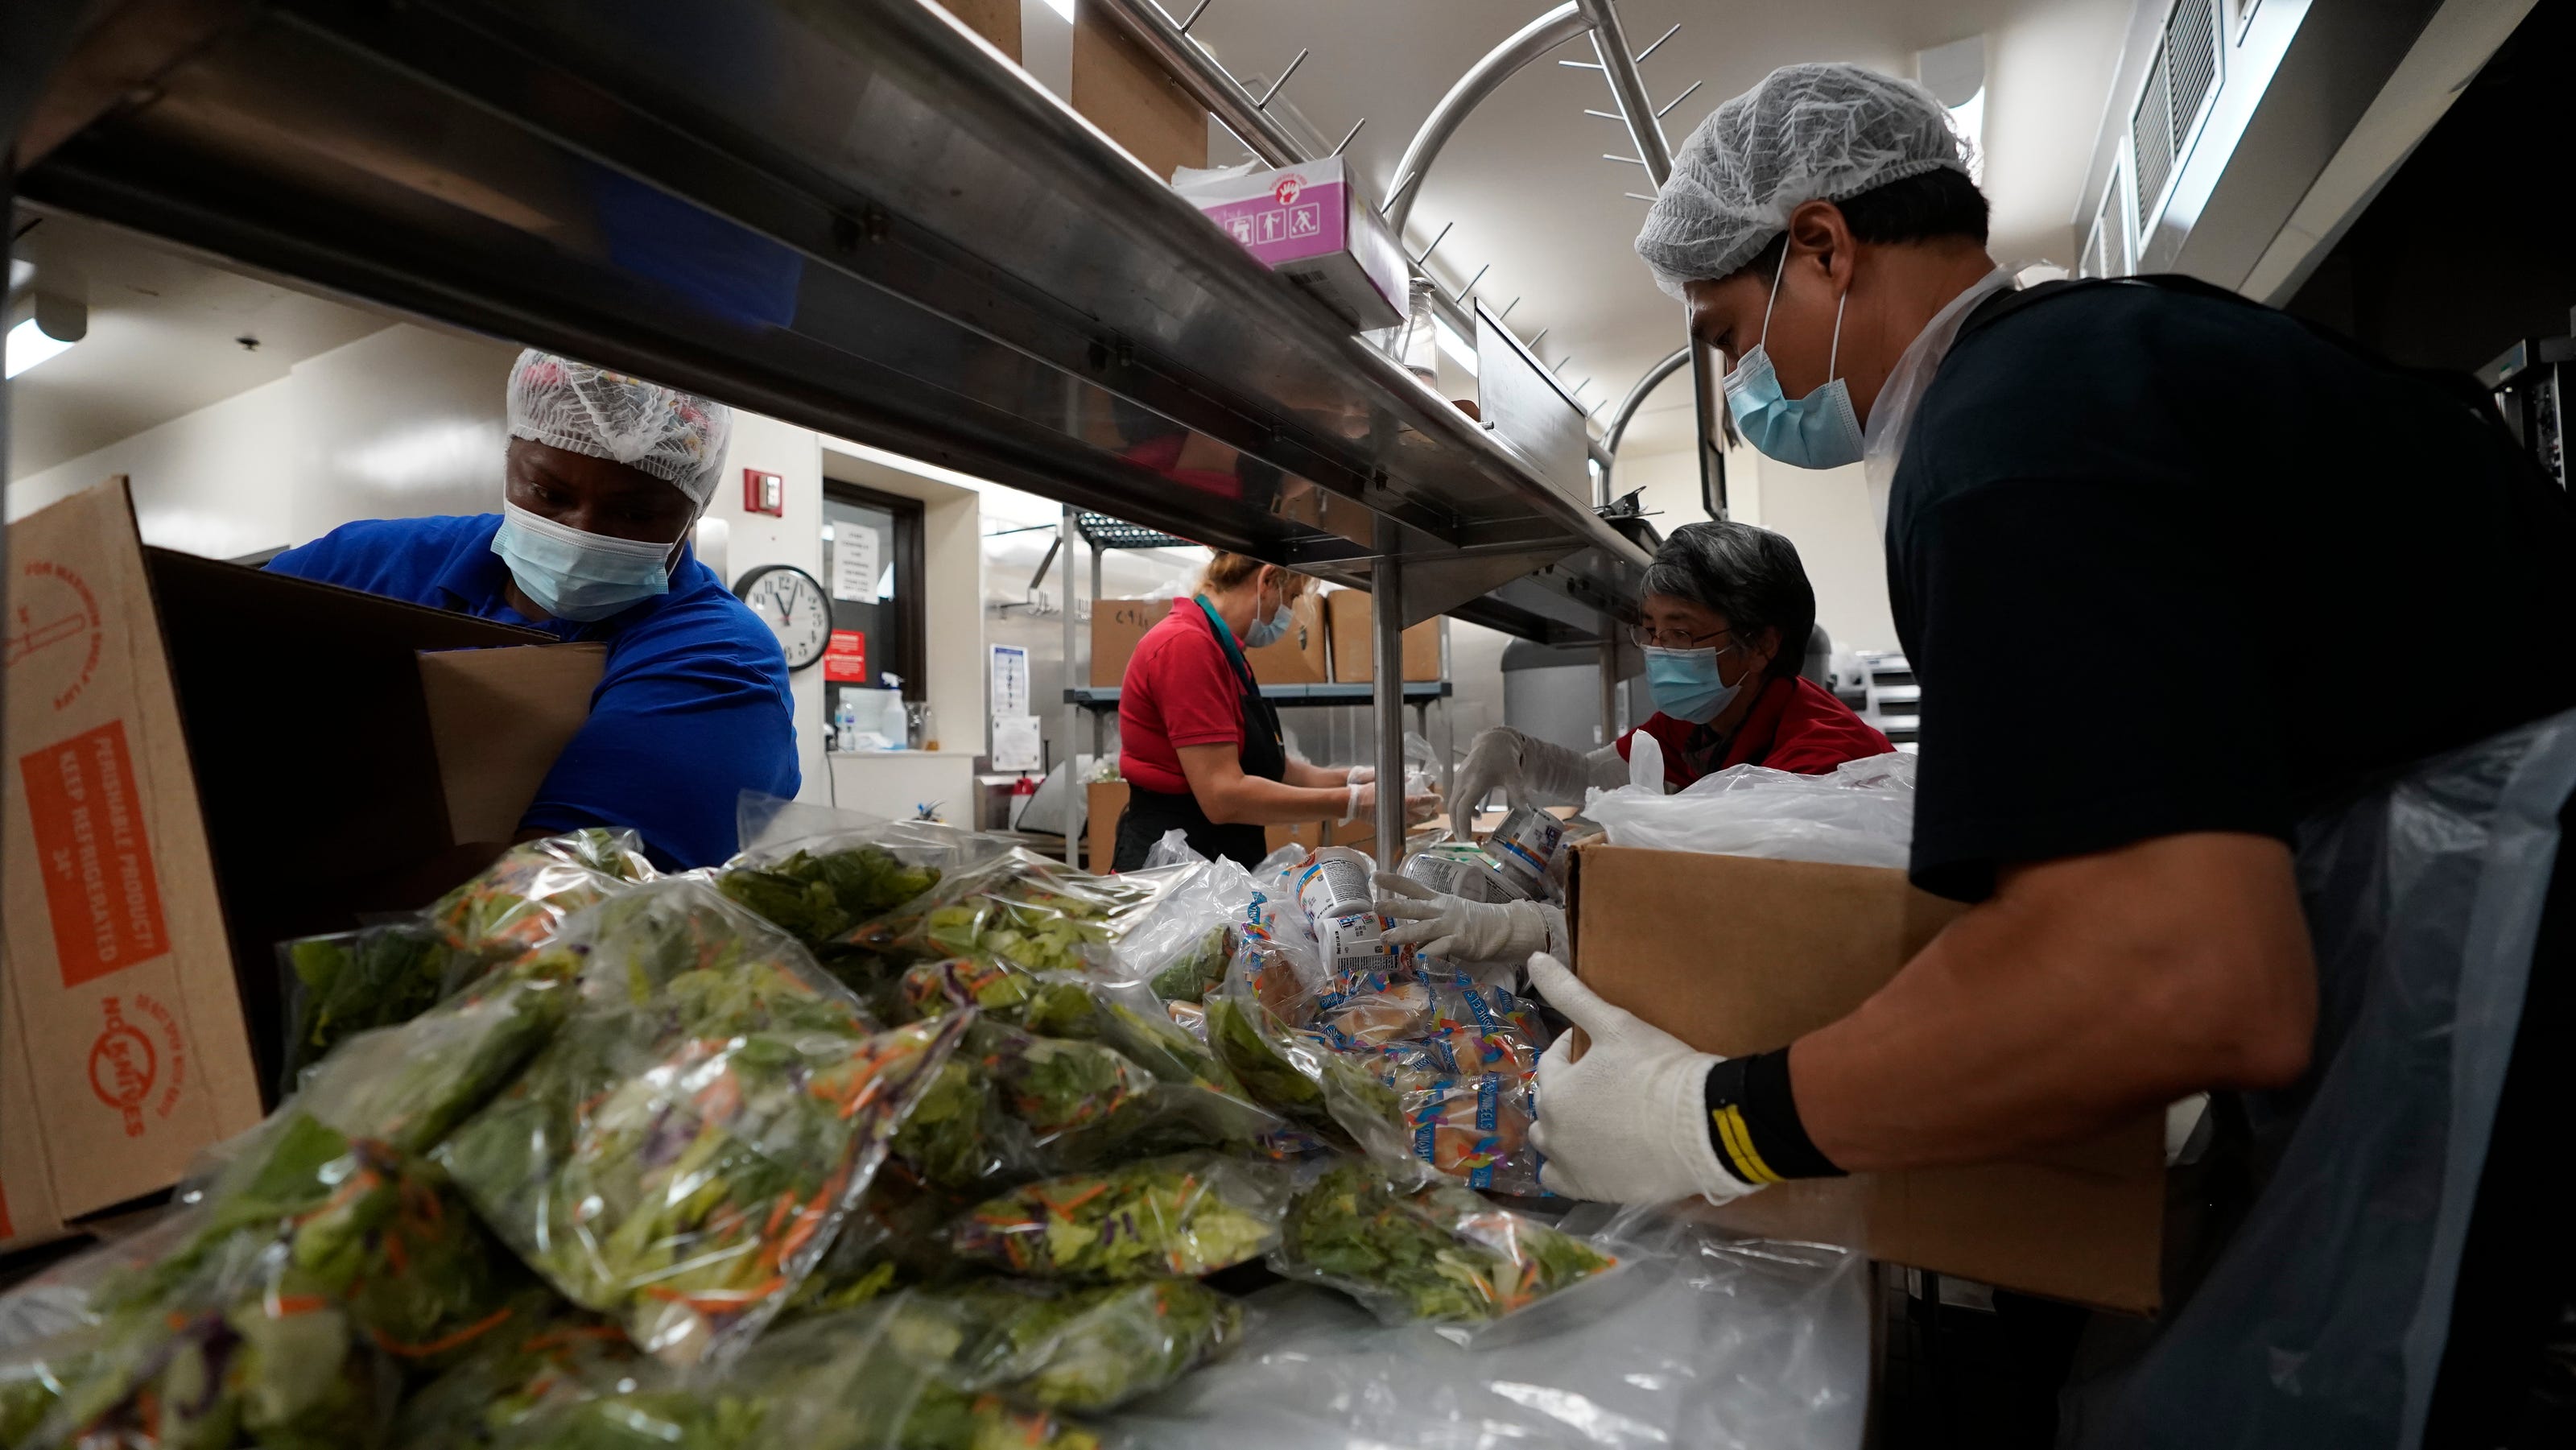 California launches first statewide free school lunch program in US